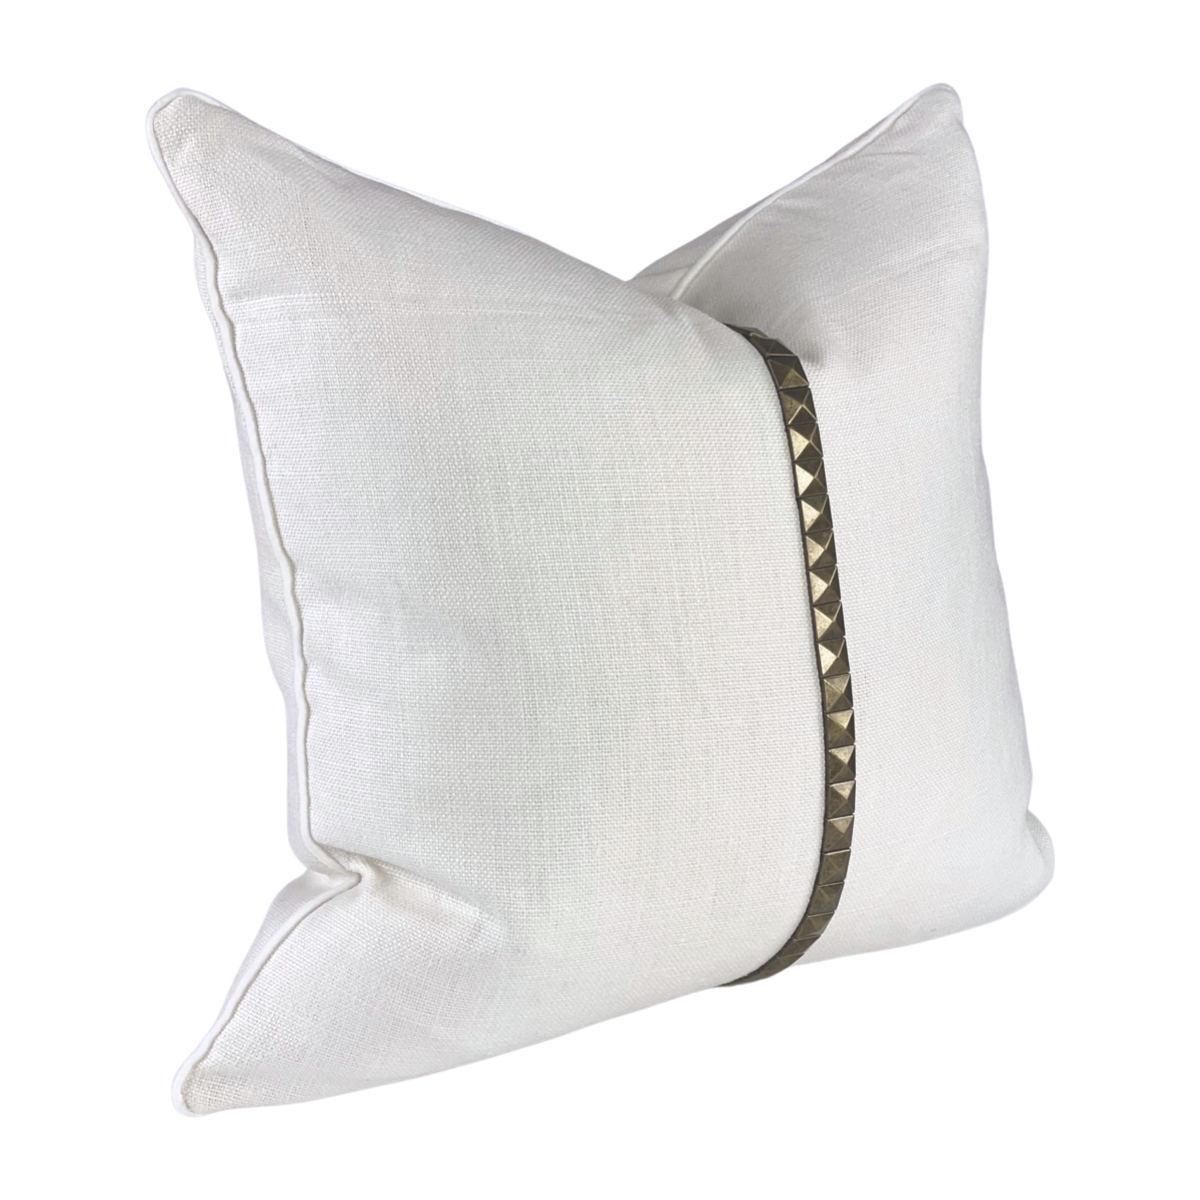 Translating luxury design, this high-end, white linen pillow injects contemporary aesthetics into interiors. The beautiful 100% heavy-weight European linen pillow features brassy metal stud detailing and is finished with elegant velvet trim piping.